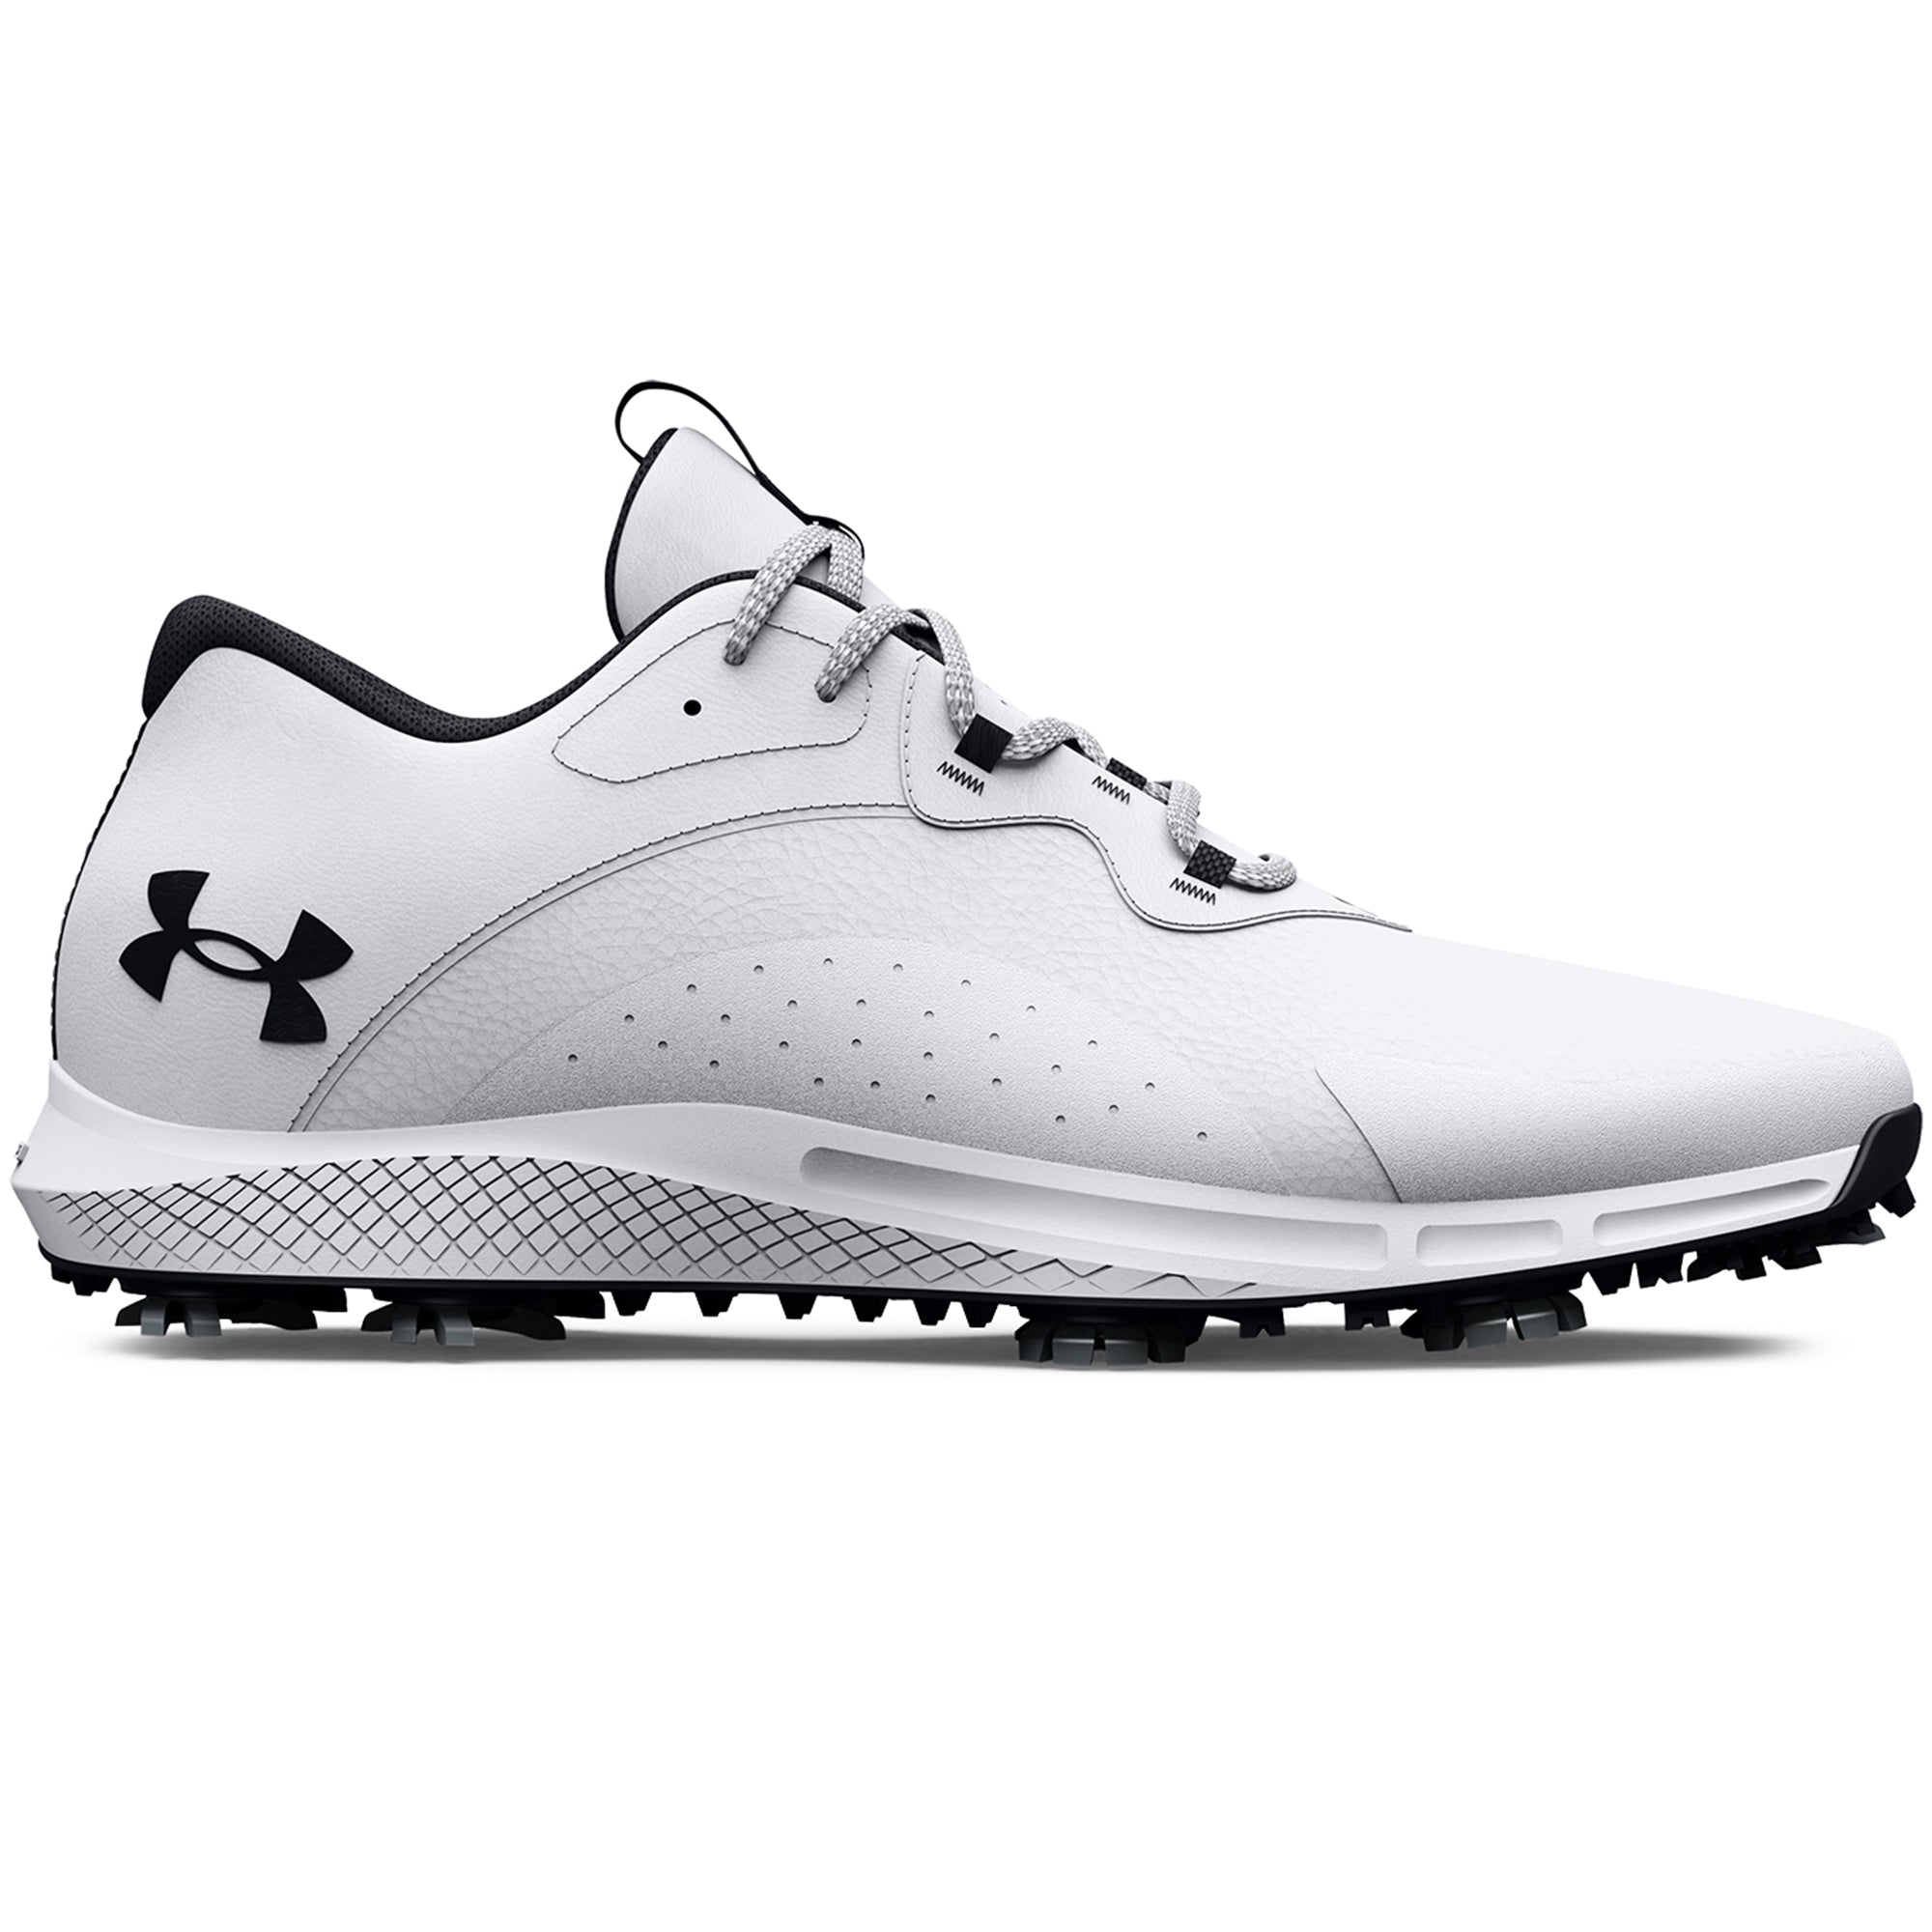 under-armour-charged-draw-2-e-golf-shoes-3026401-white-100